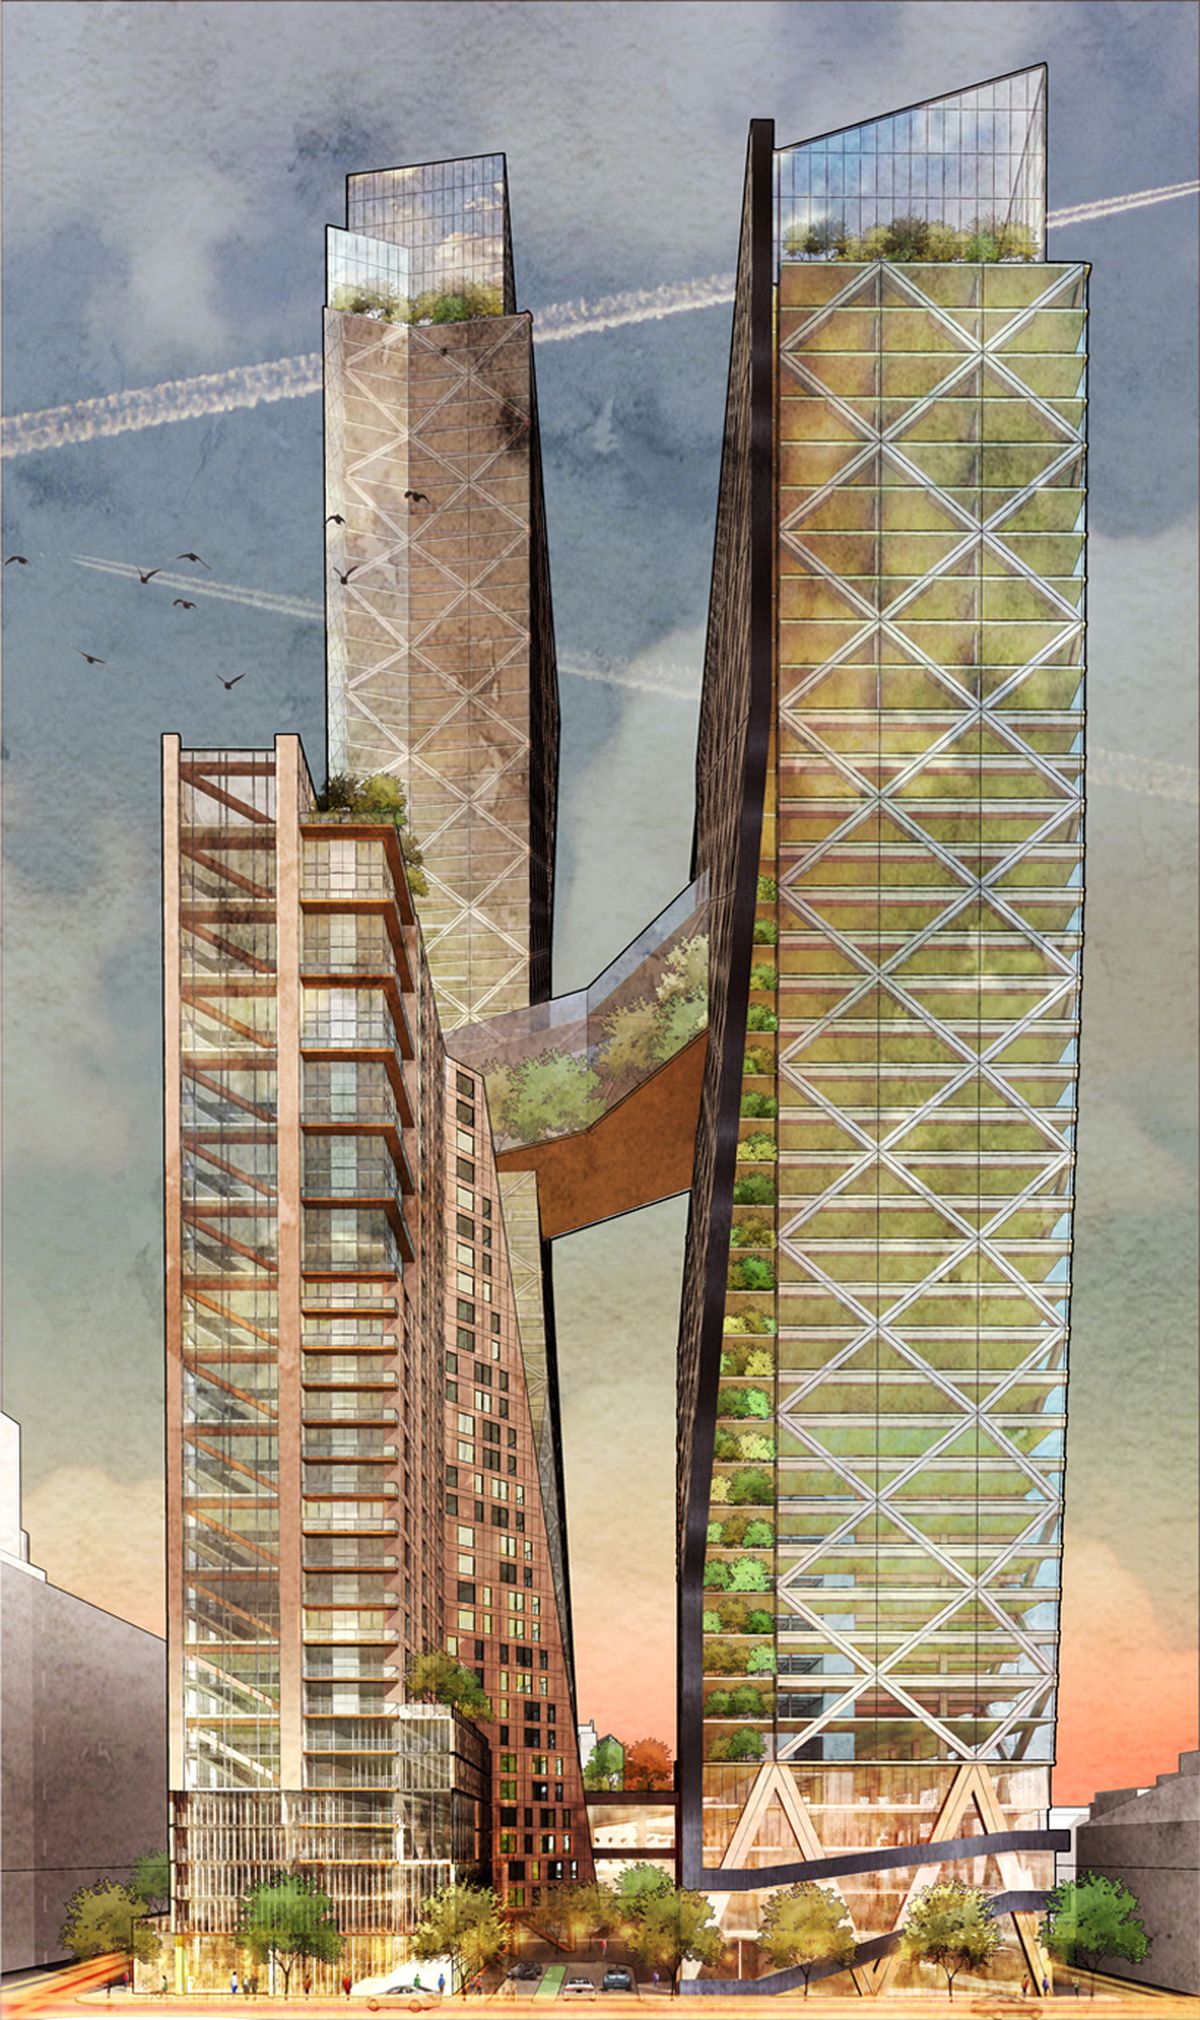 DC architects envision timber skyscraper for Philly - Curbed Philly